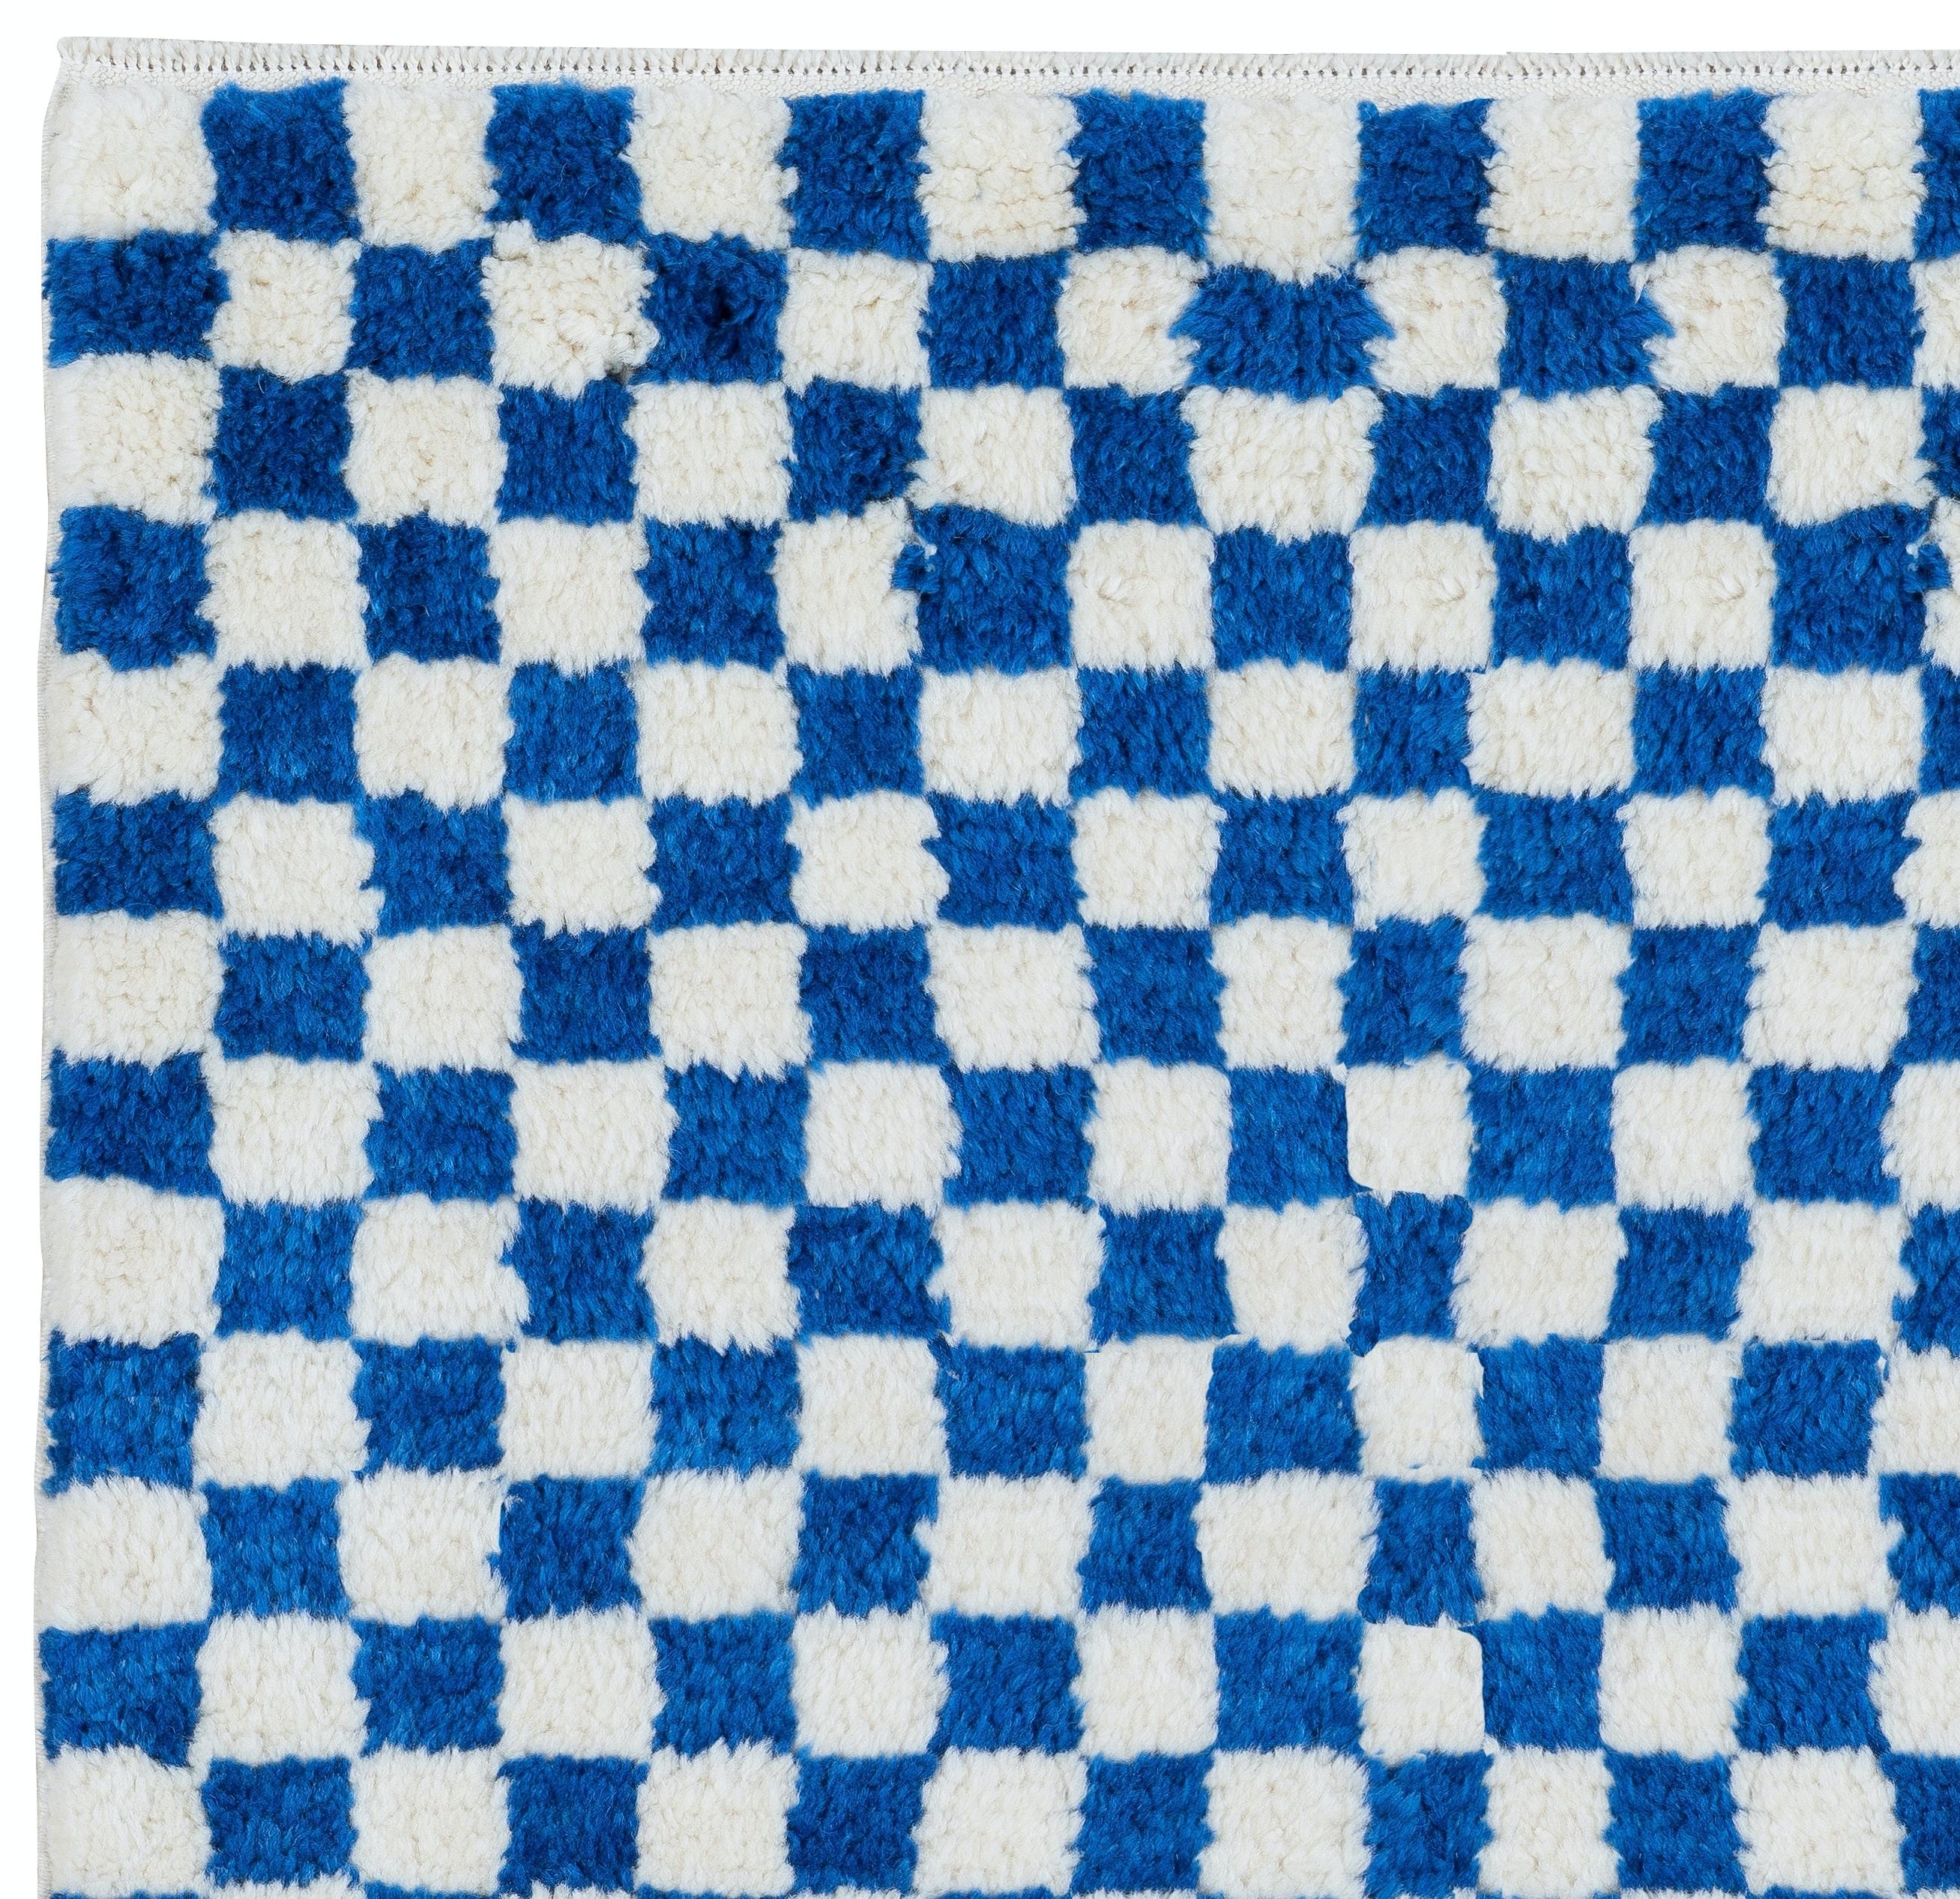 A custom, handmade Tulu rug made from 100% Hand-Spun Wool of finest quality. It features a simple checkered design in cream and blue. 

It can be CUSTOM-PRODUCED in any Design, Size, Color Combination and Pile Thickness requested. 

These